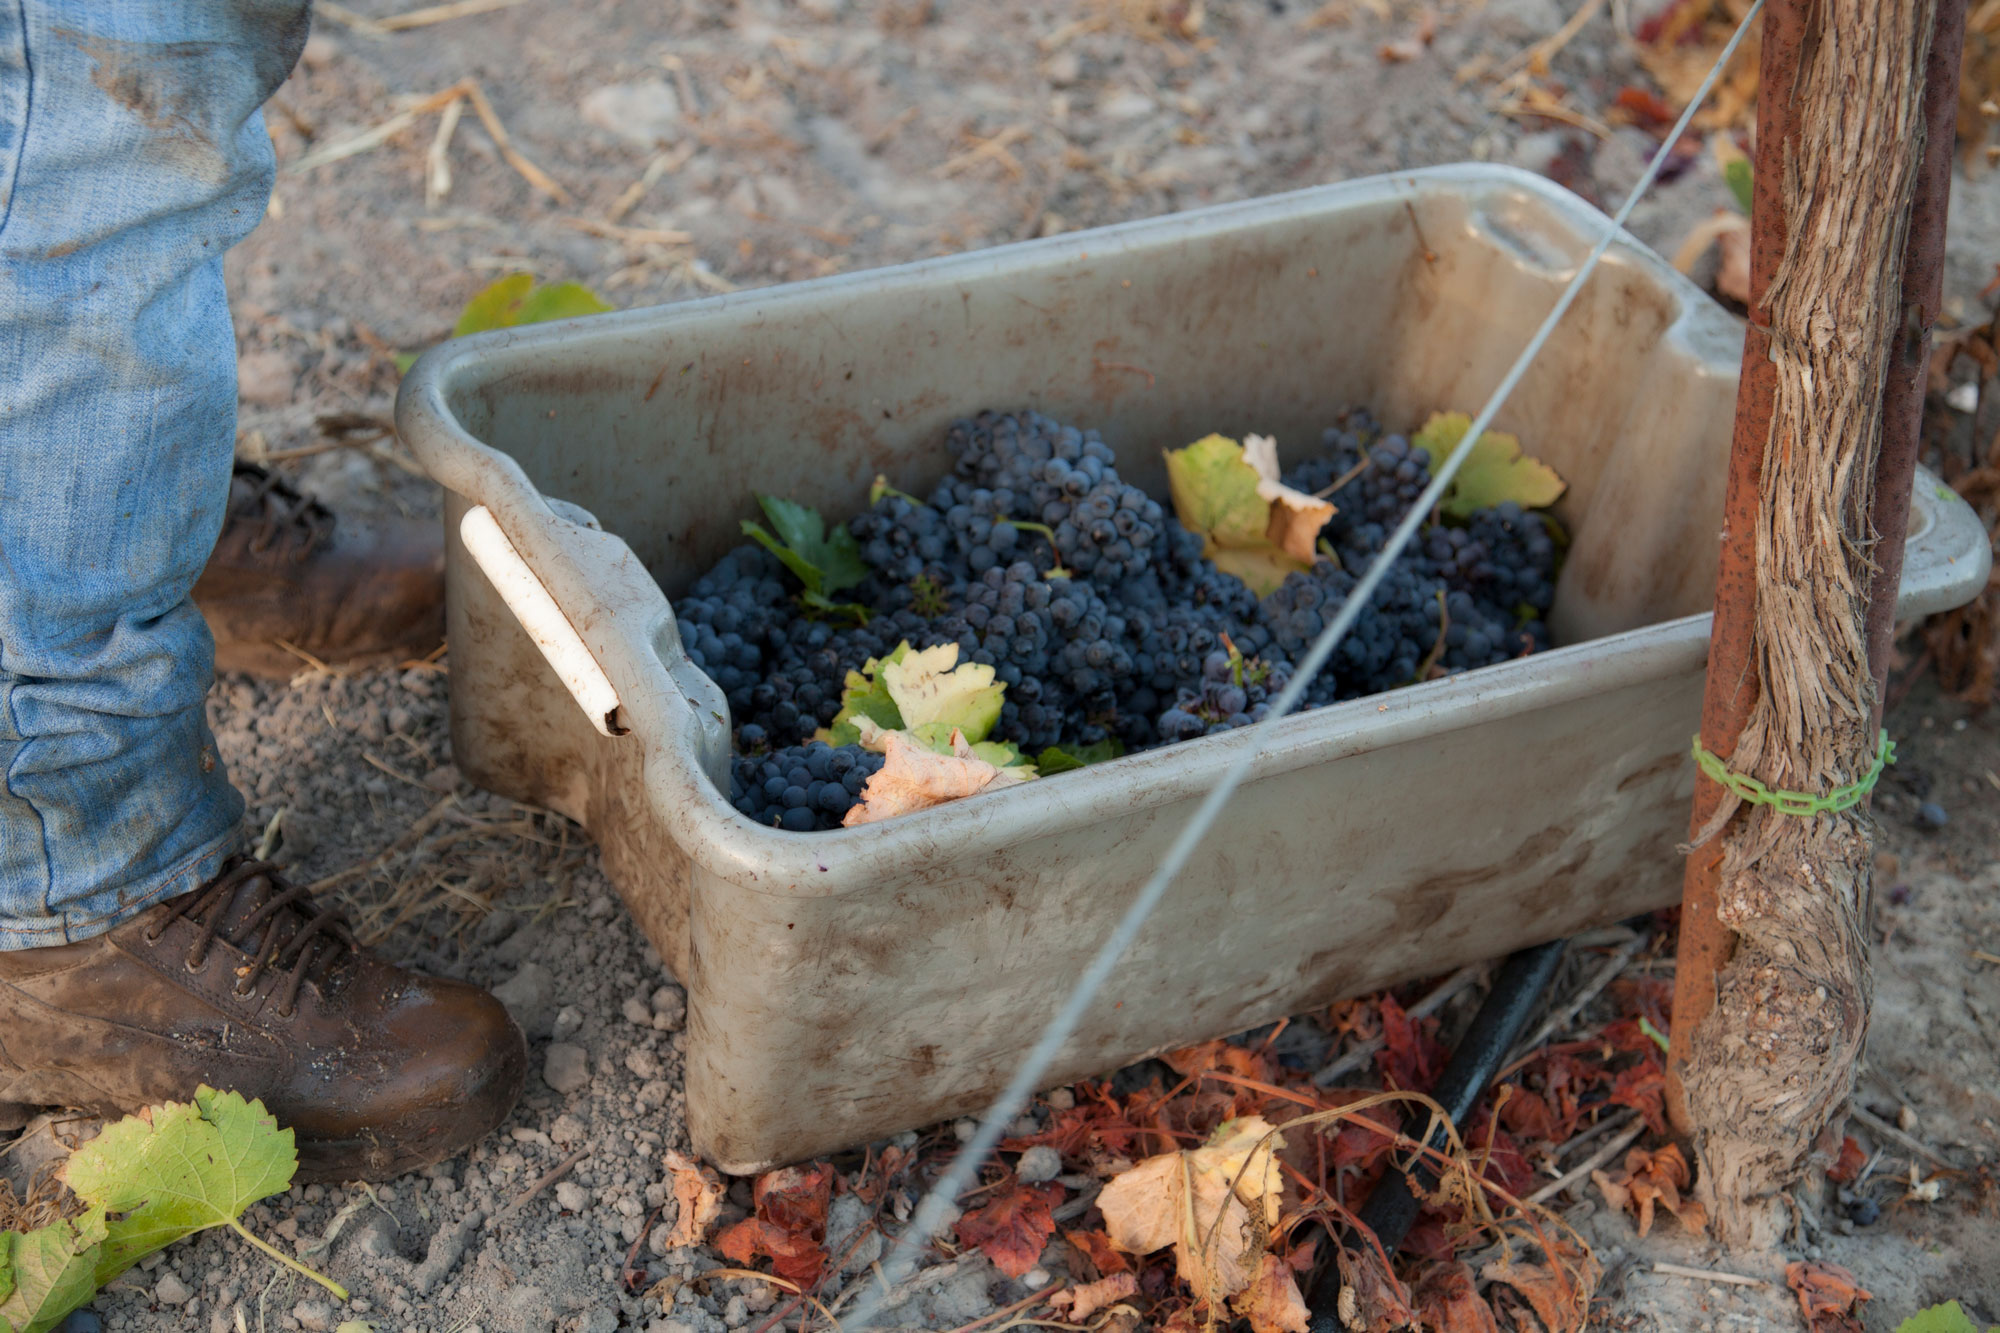 Container of harvested grapes